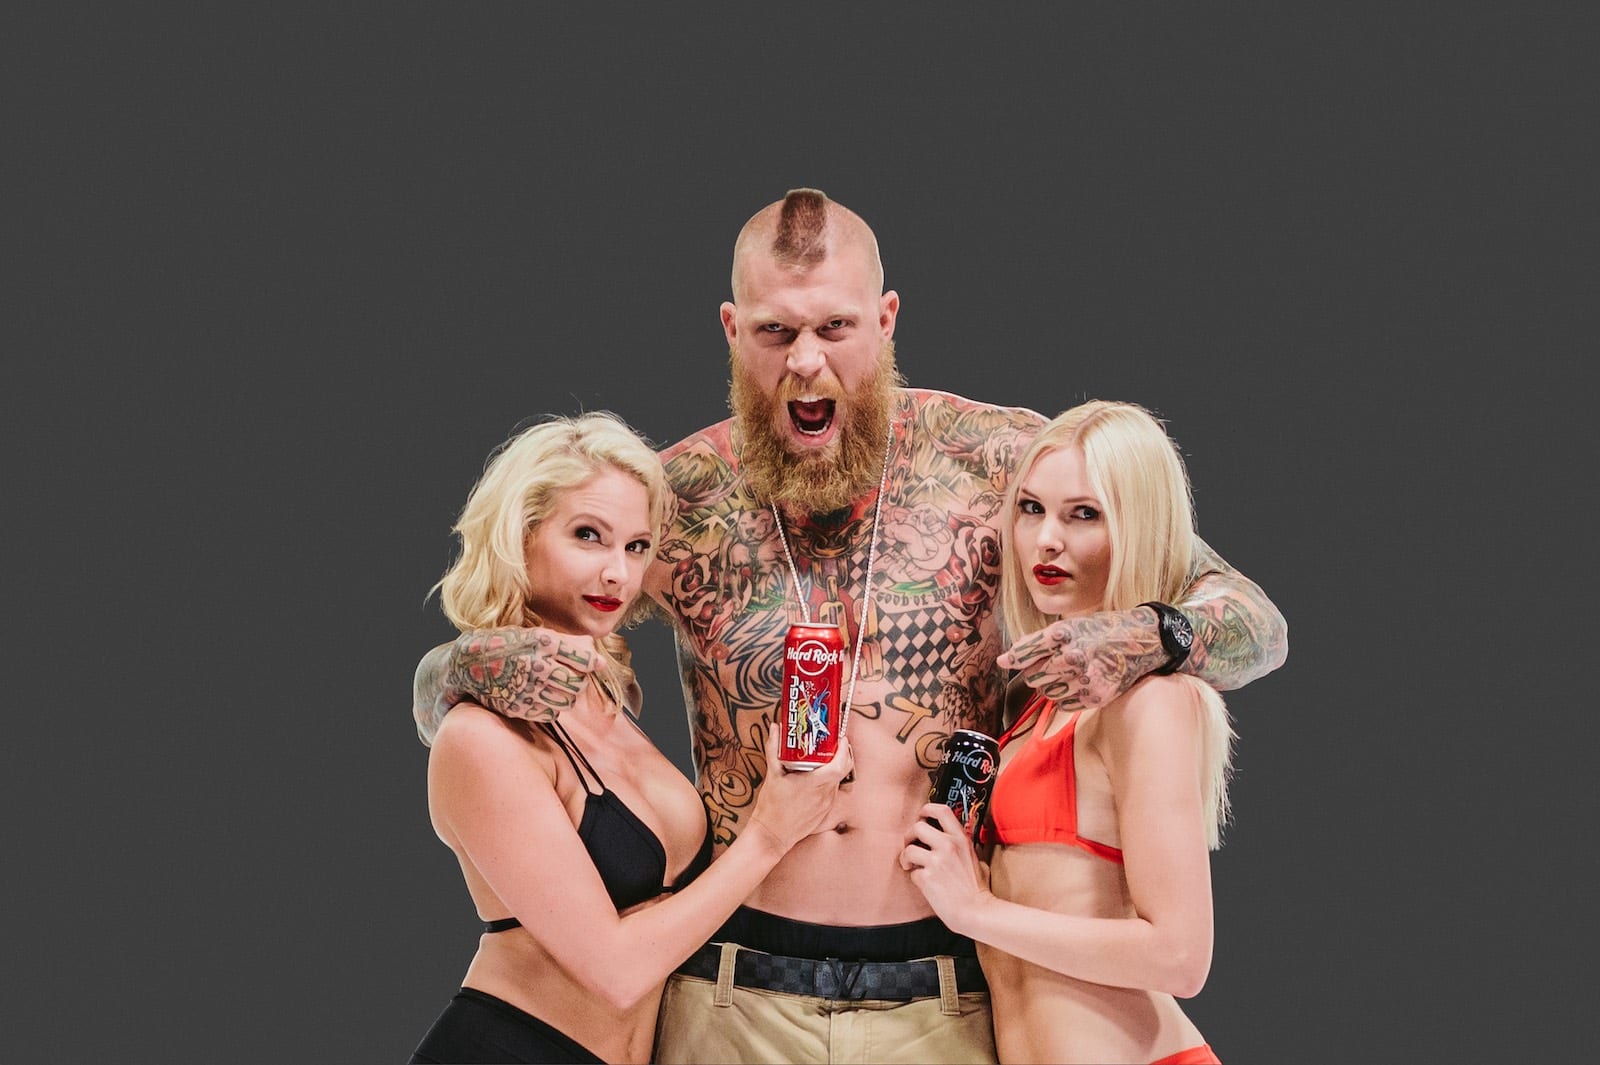 Bearded tattooed man holding two women holding Hard Rock Energy drinks next to him posing for camera